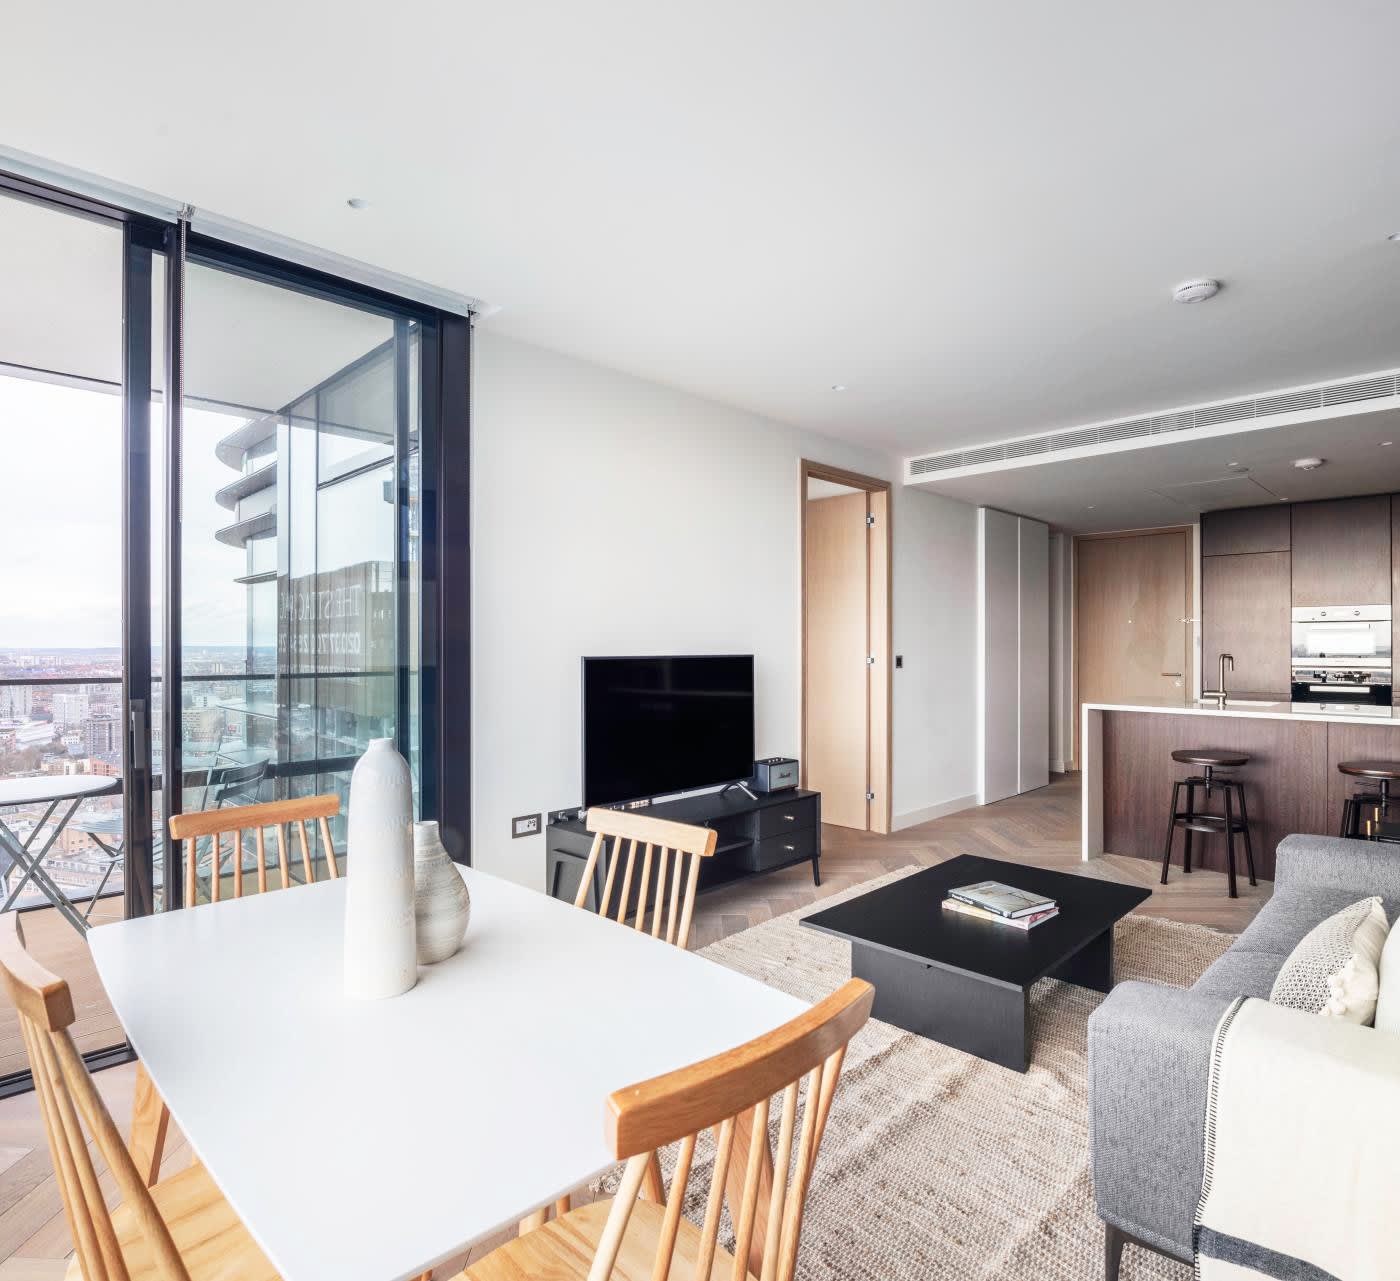 open-plan furnished apartment. Wooden cabinets, grey, white and black tones and a balcony with gorgeous city views